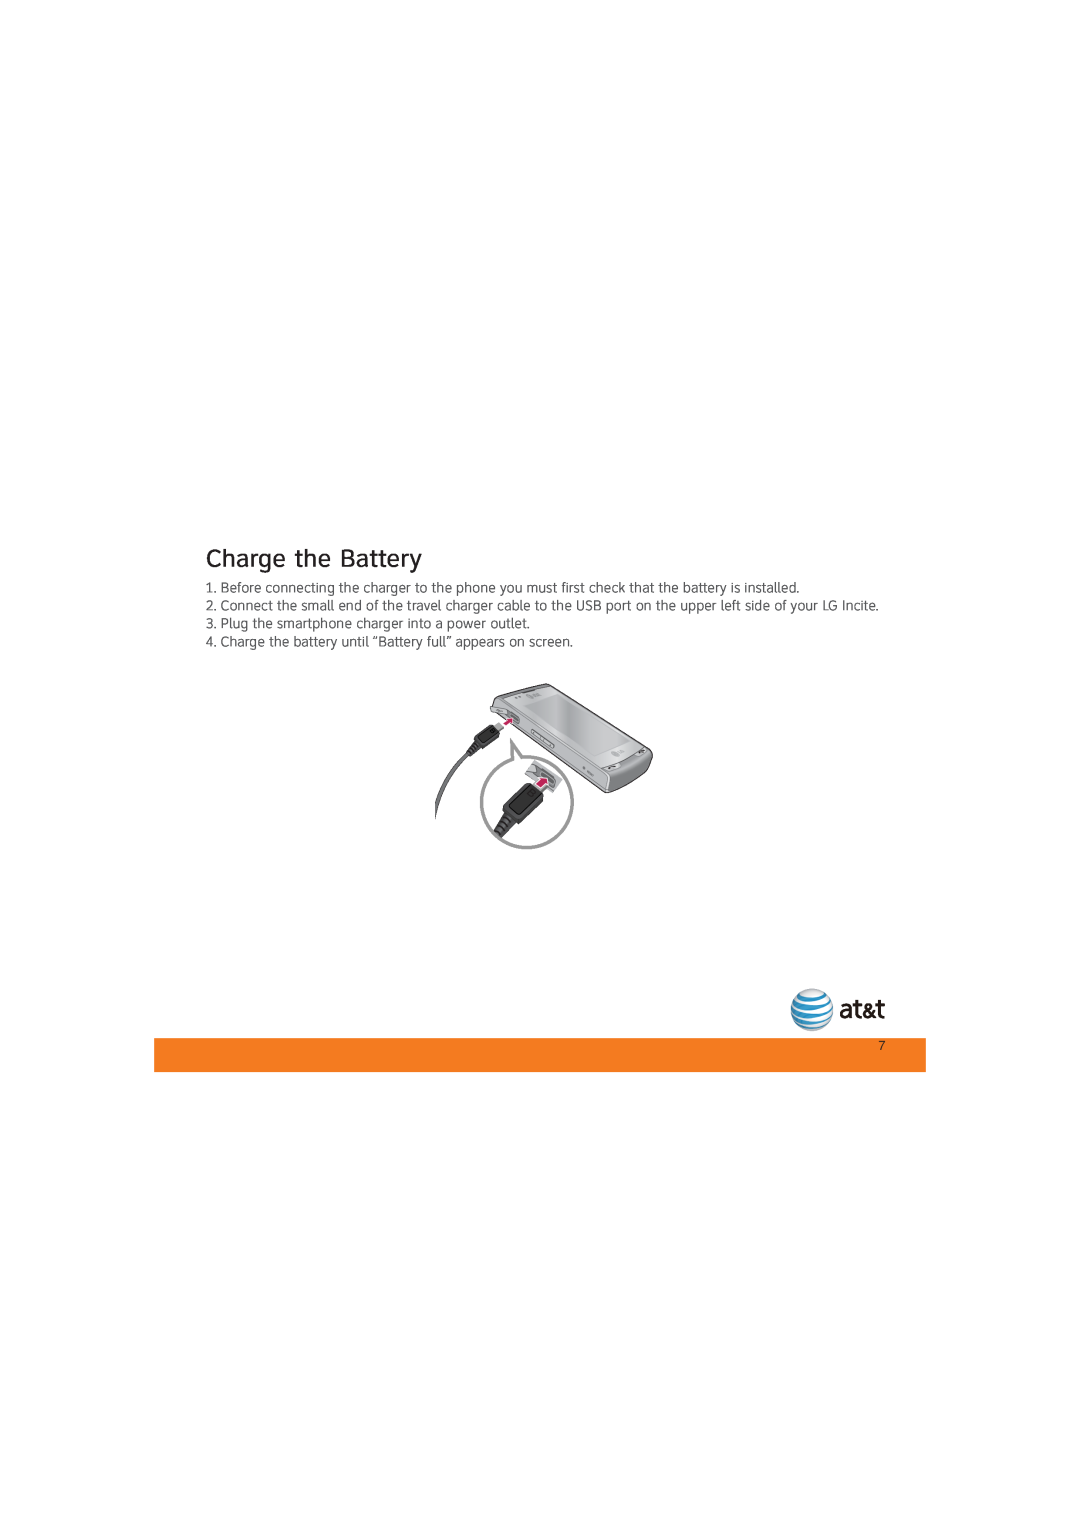 LG Electronics MCD0009405 specifications Charge the Battery, Plug the smartphone charger into a power outlet 